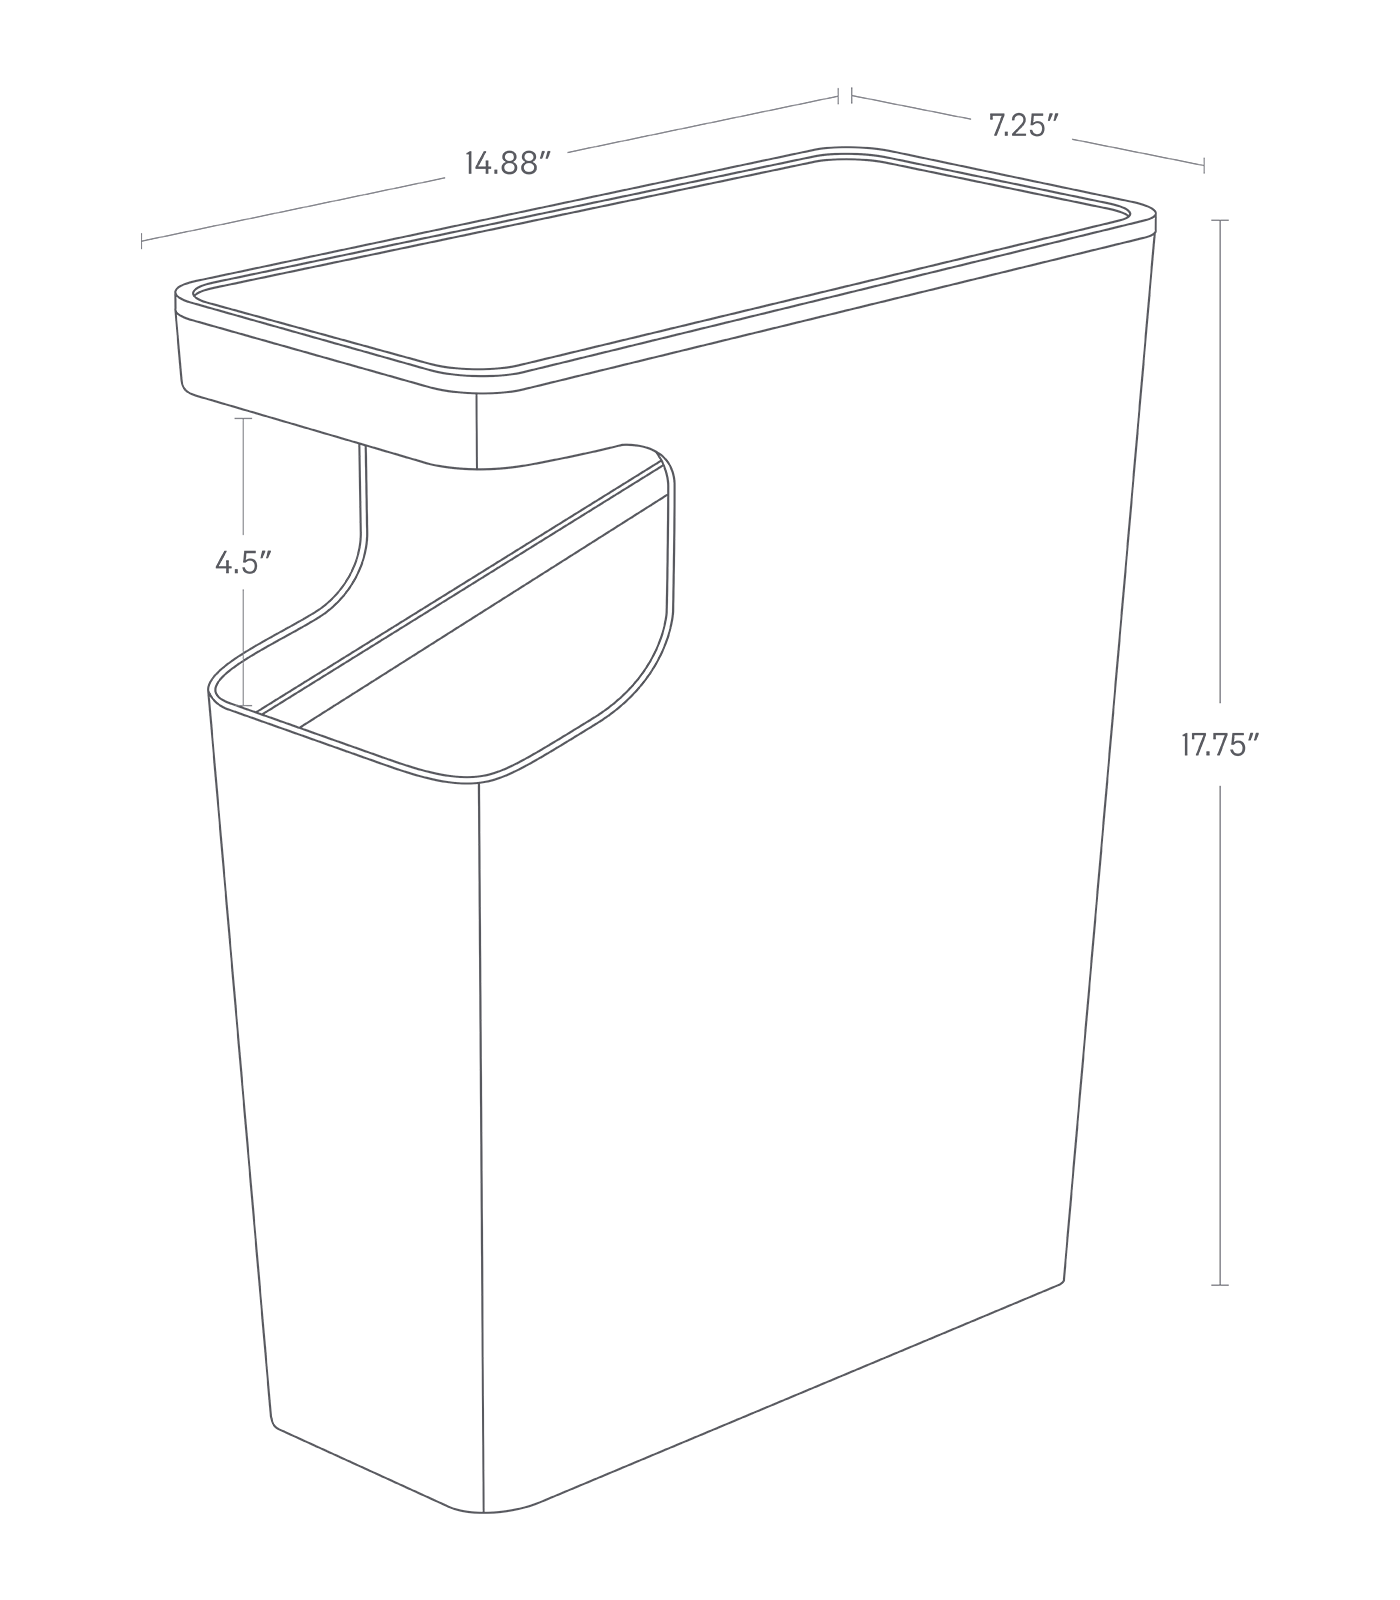 Dimension image for Side Table Trash Can on a white background including dimensions  L 7.28 x W 14.96 x H 17.72 inches